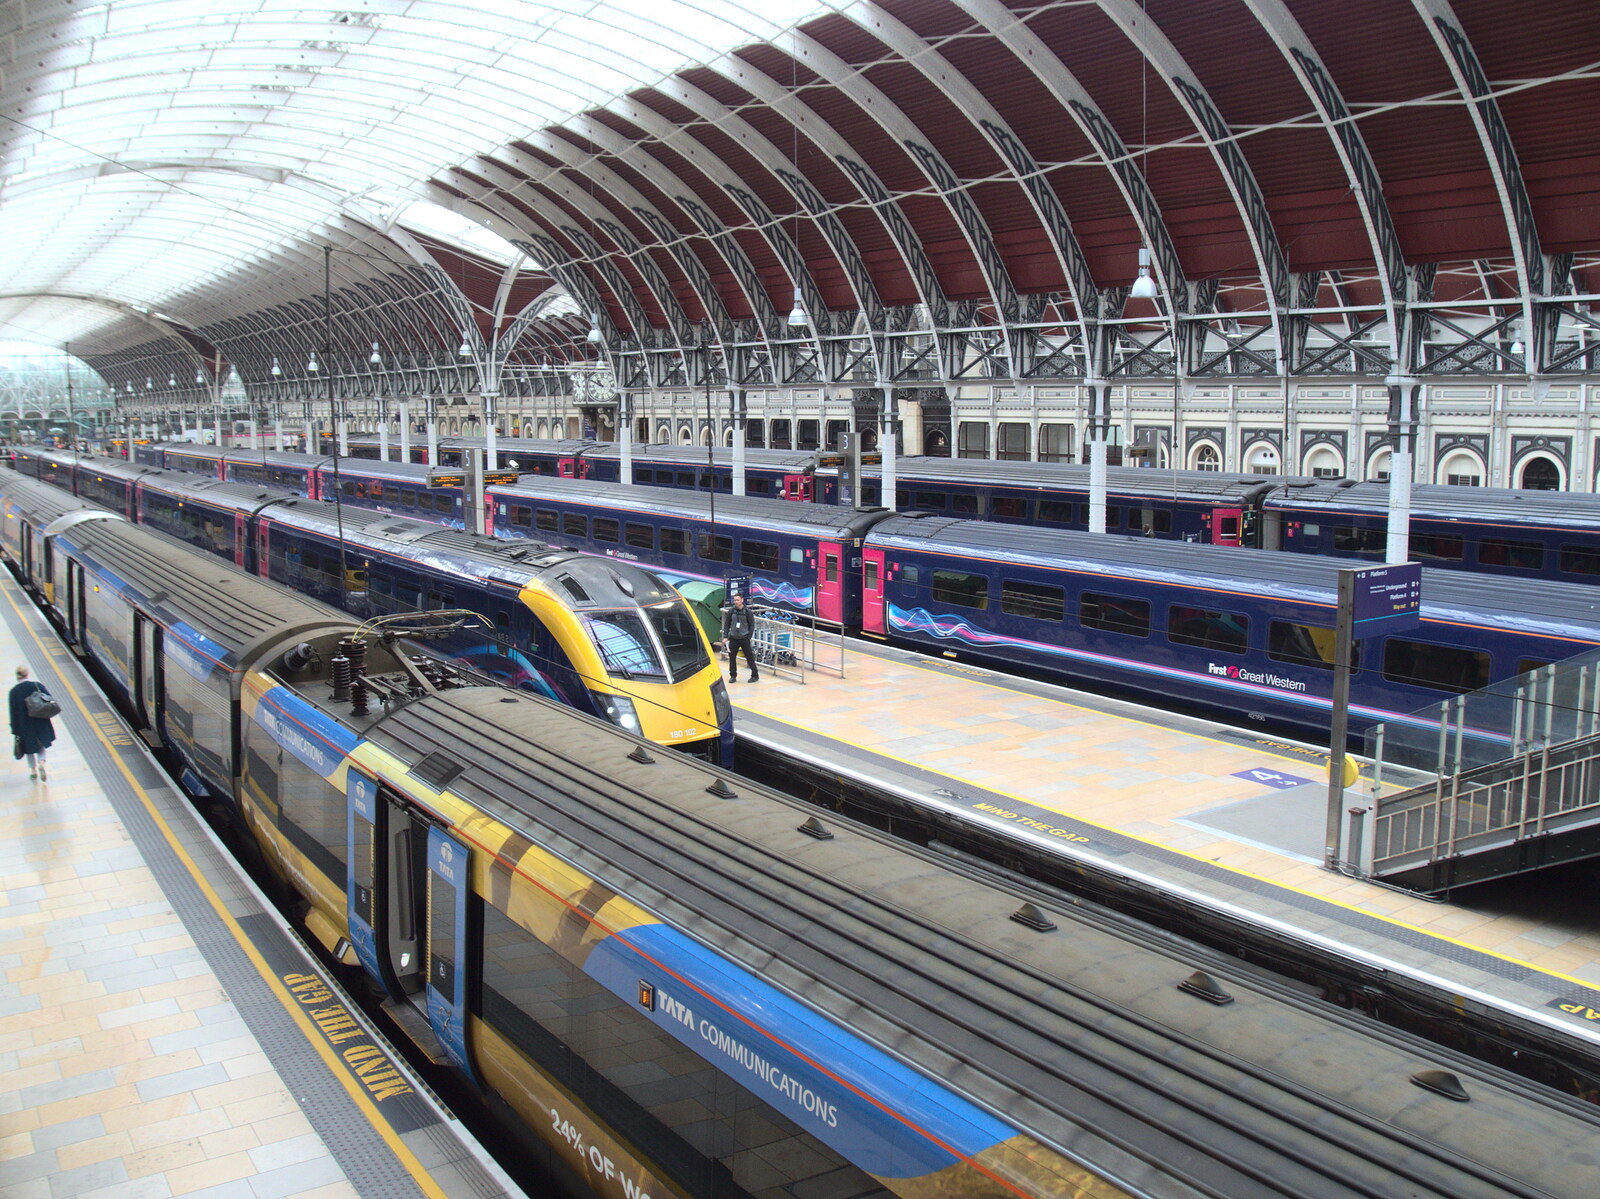 Paddington is packed with trains from A Trip to Reykjavik, Iceland - 20th April 2017